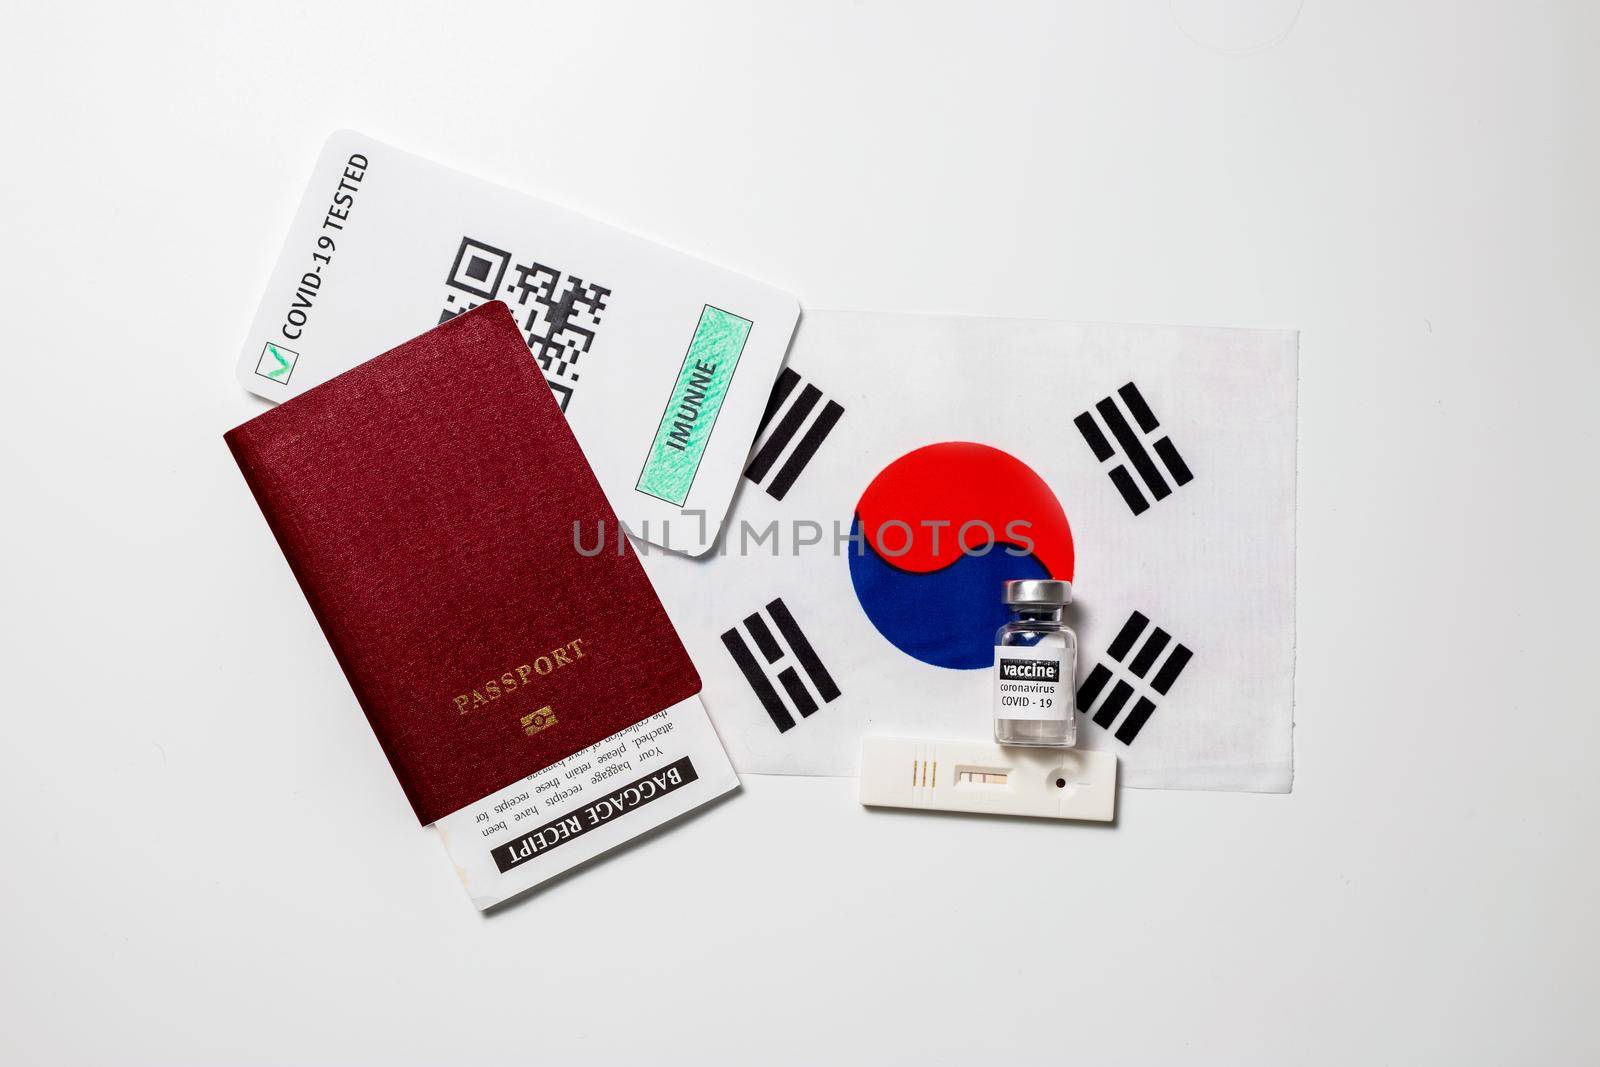 Immunity passport allows you travel during lockdown, Vaccination passport against covid-19 in South Korea. Certificate for people who have had coronavirus or made vaccine.